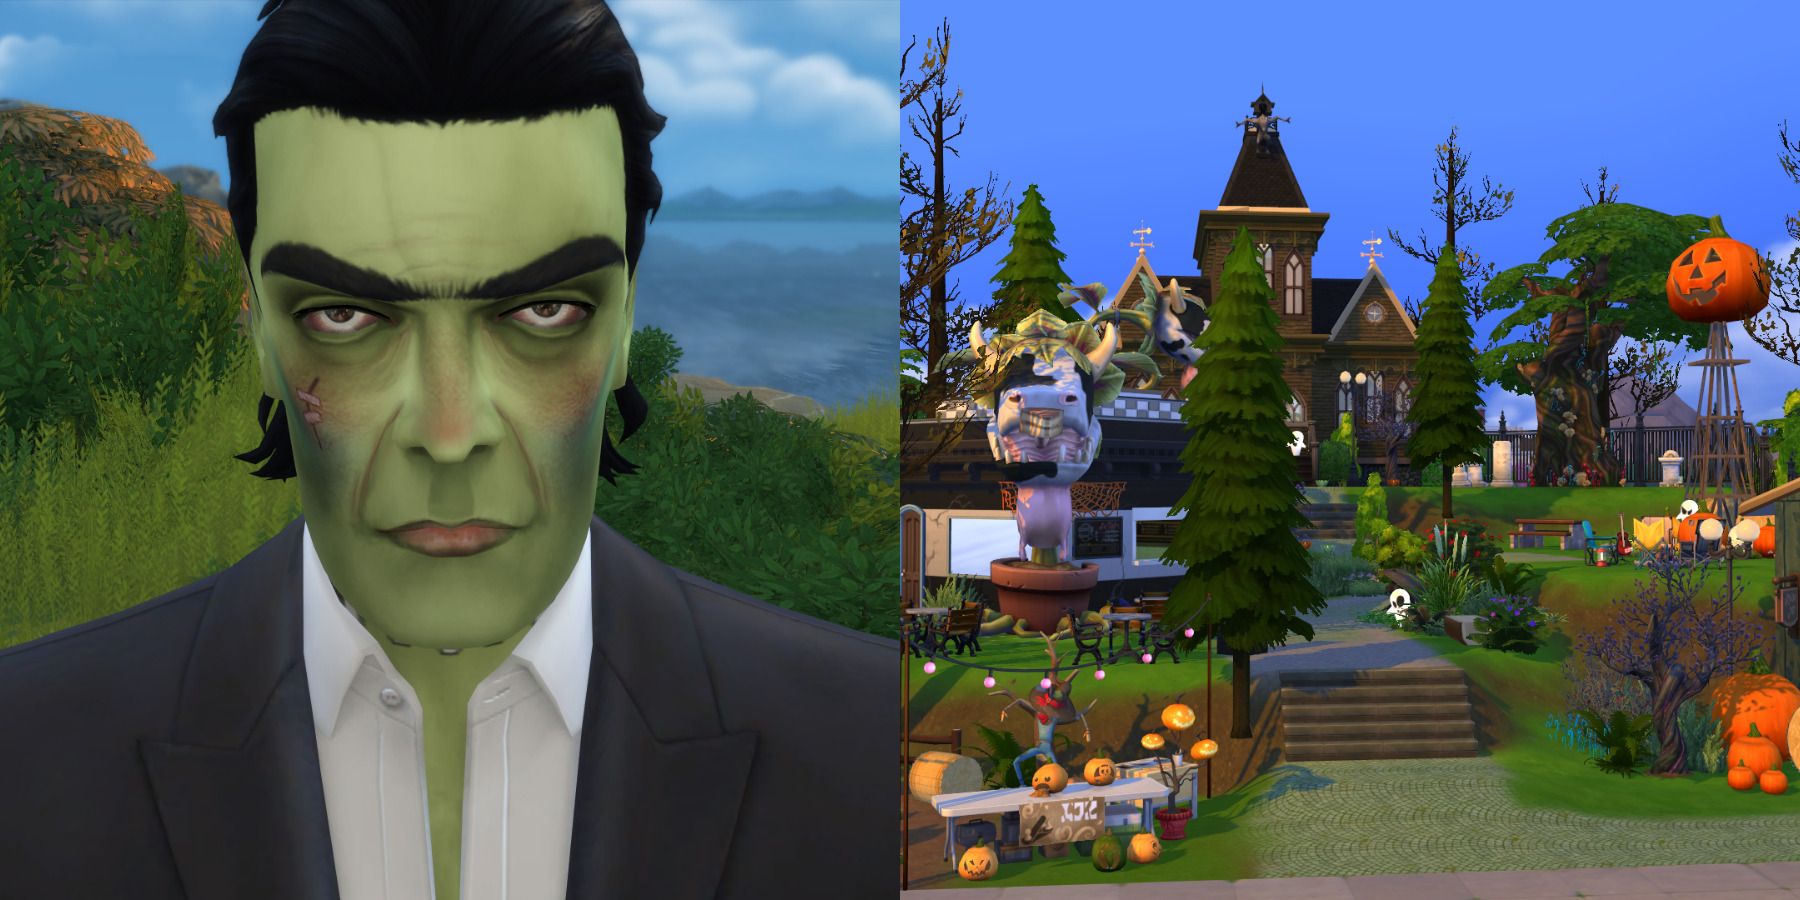 The Sims 4 Halloween CC feature split image Frank N. Stein and Halloween village